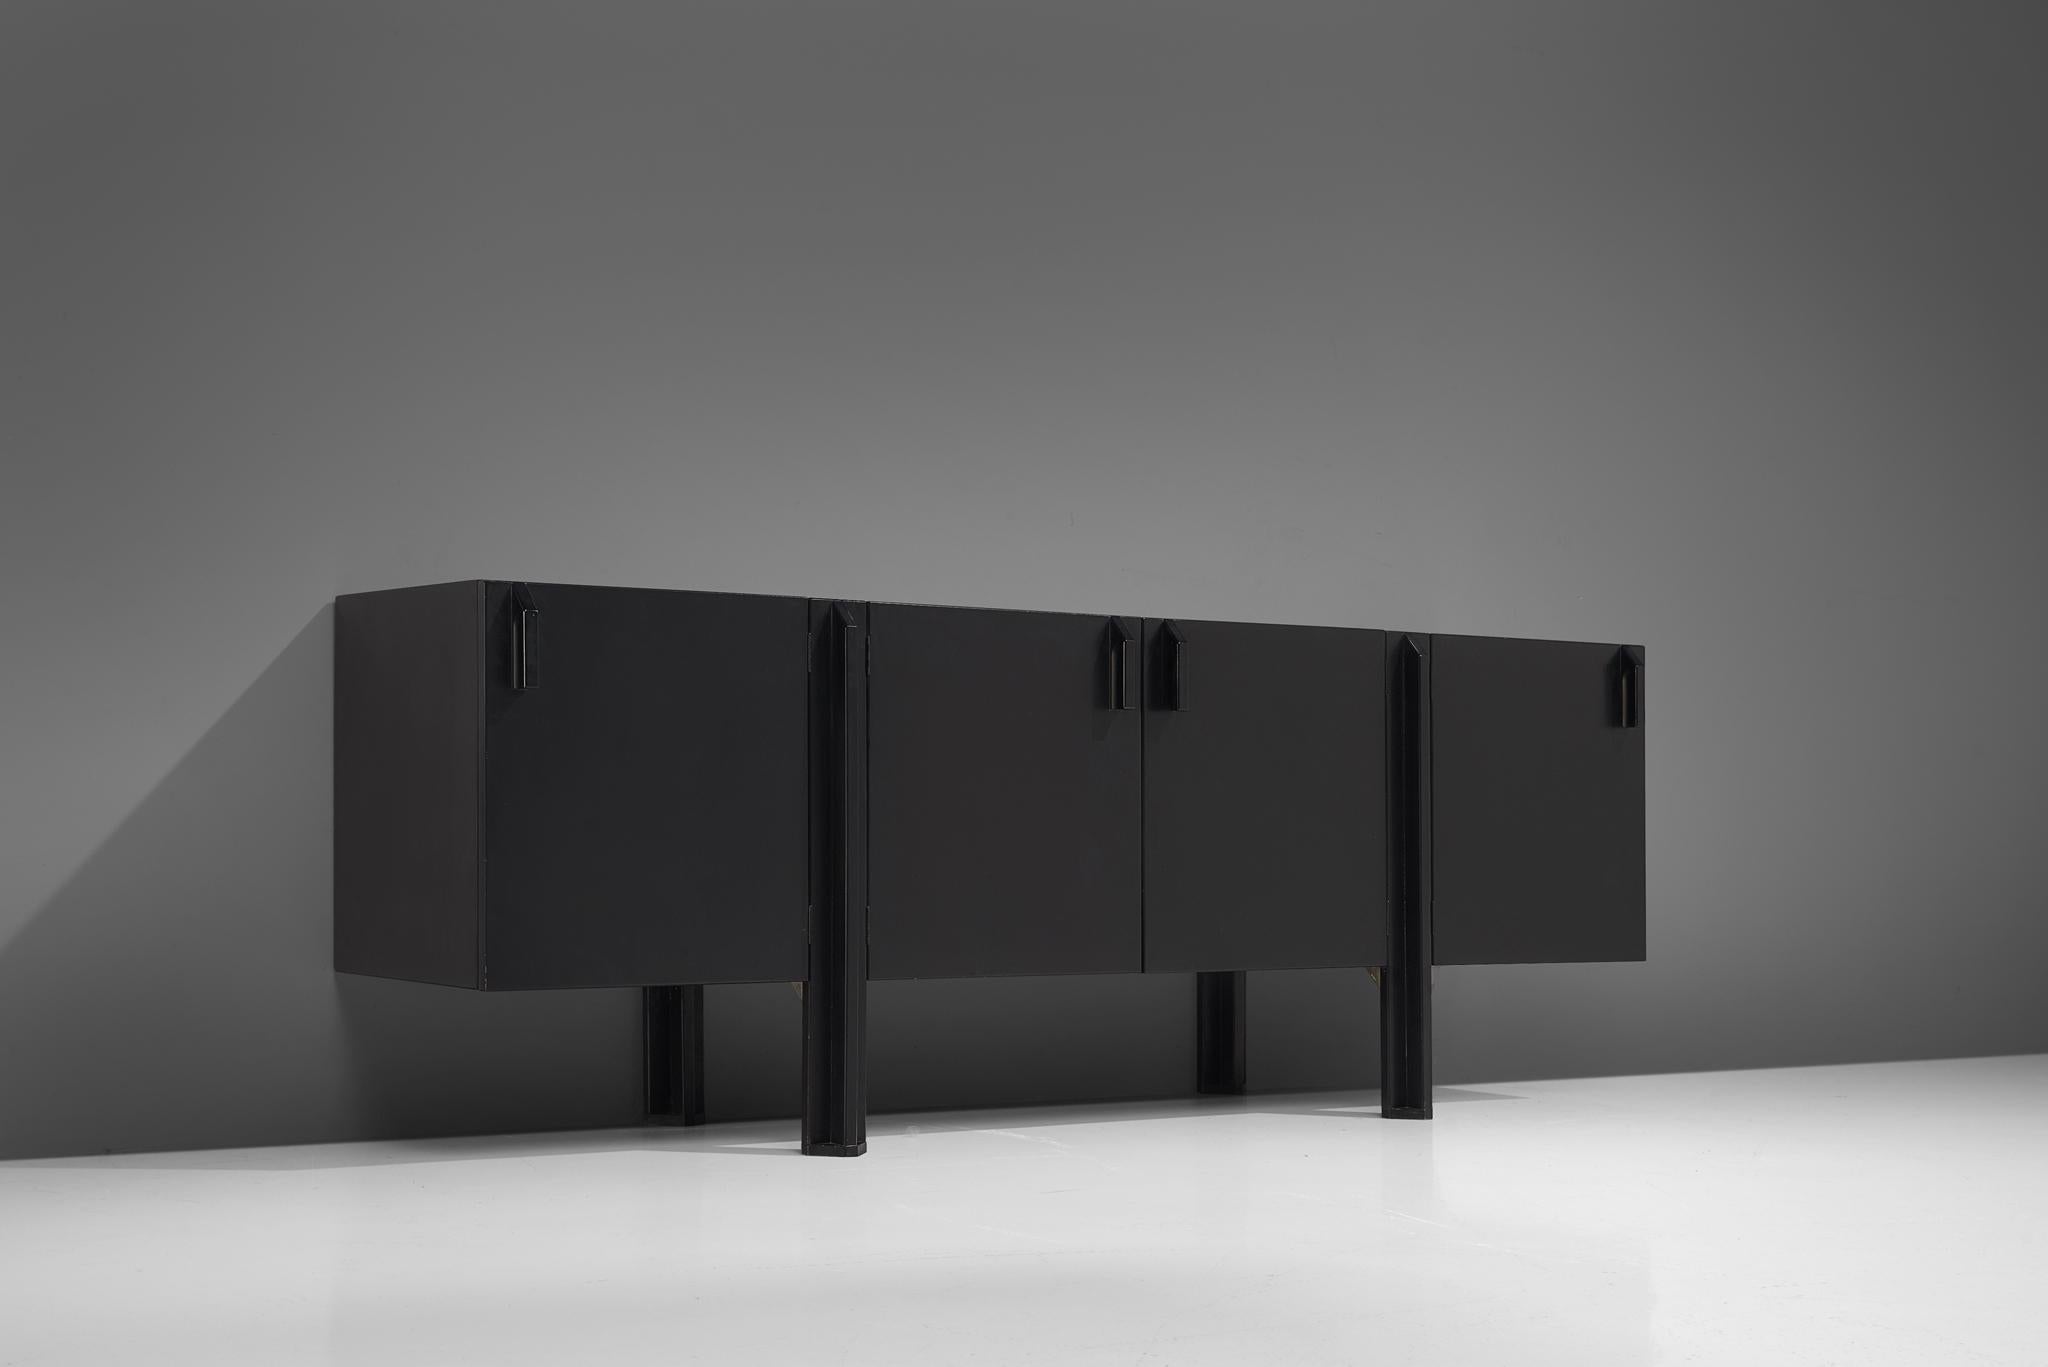 José Martínez-Medina, credenza, black lacquered wood, Spain, 1970-1980s.

This monumental, black satinatedsideboard consists out of three separate modules, divided over four doors. The doors feature sturdy, geometric handles. Lifted from the